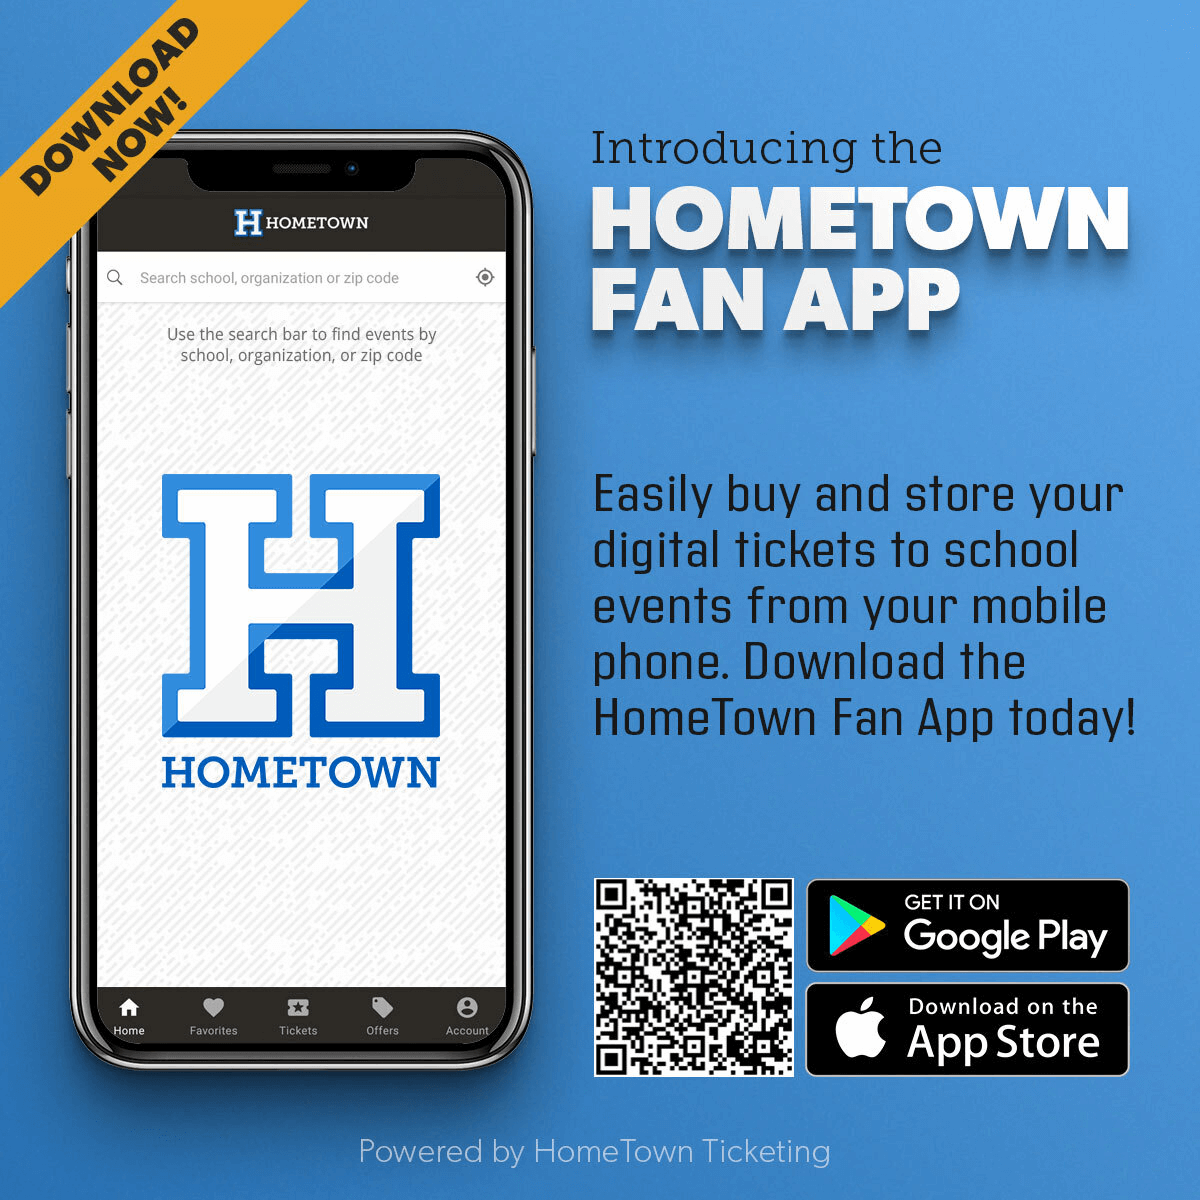  Download the HomeTown Fan App to purchase your MId-Del High School Athletic Tickets. Now you can easily buy and store your digital tickets to events from your mobile phone with the HomeTown Fan App, available for both iOS and Android devices.